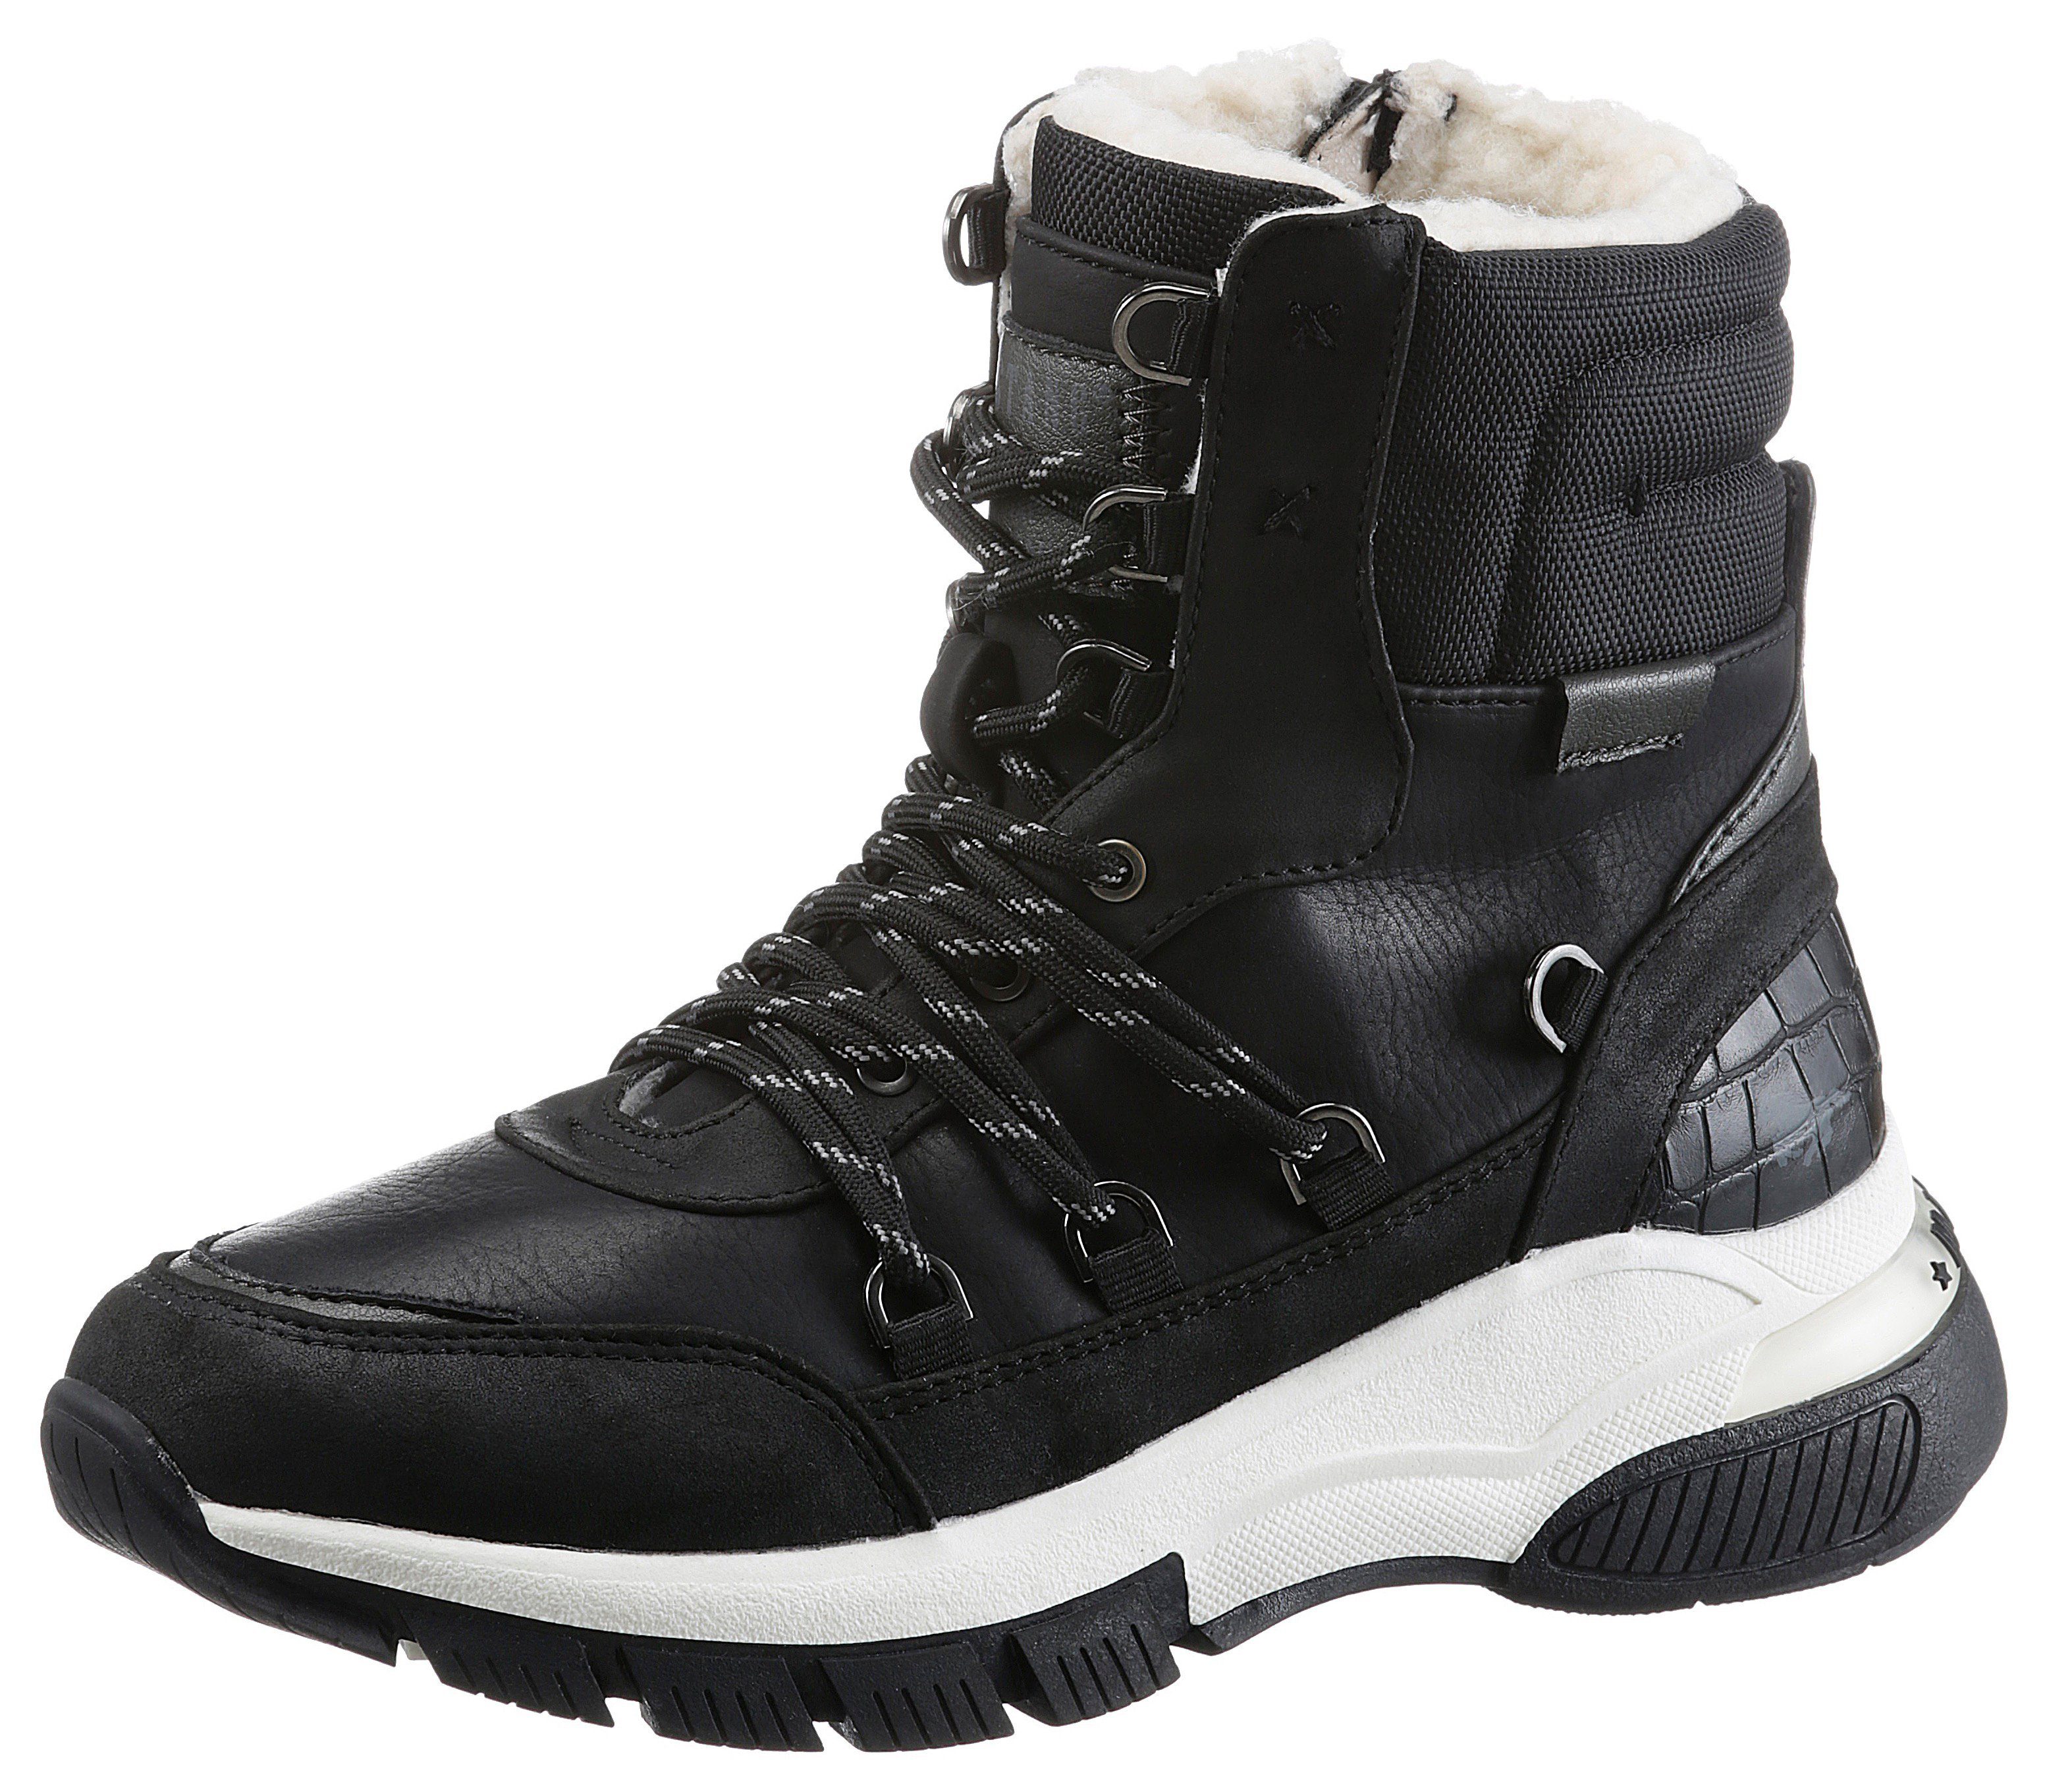 Mustang Shoes Winterboots mit zweifarbiger Laufsohle